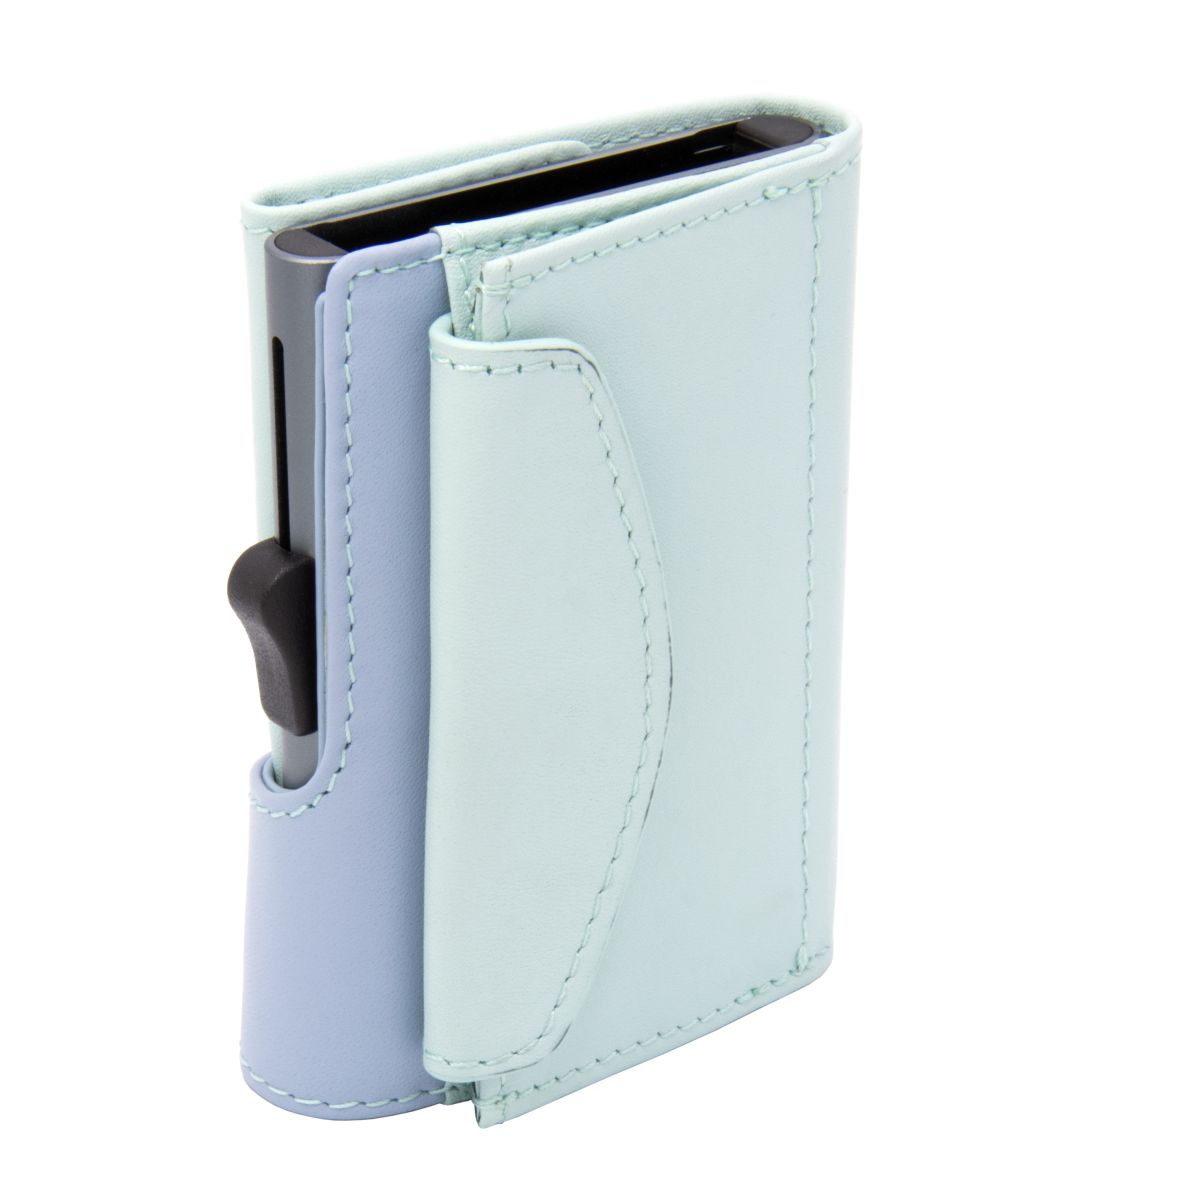 C-Secure XL Aluminum Wallet with Genuine Leather and Coins Pocket - Aqua/Ice